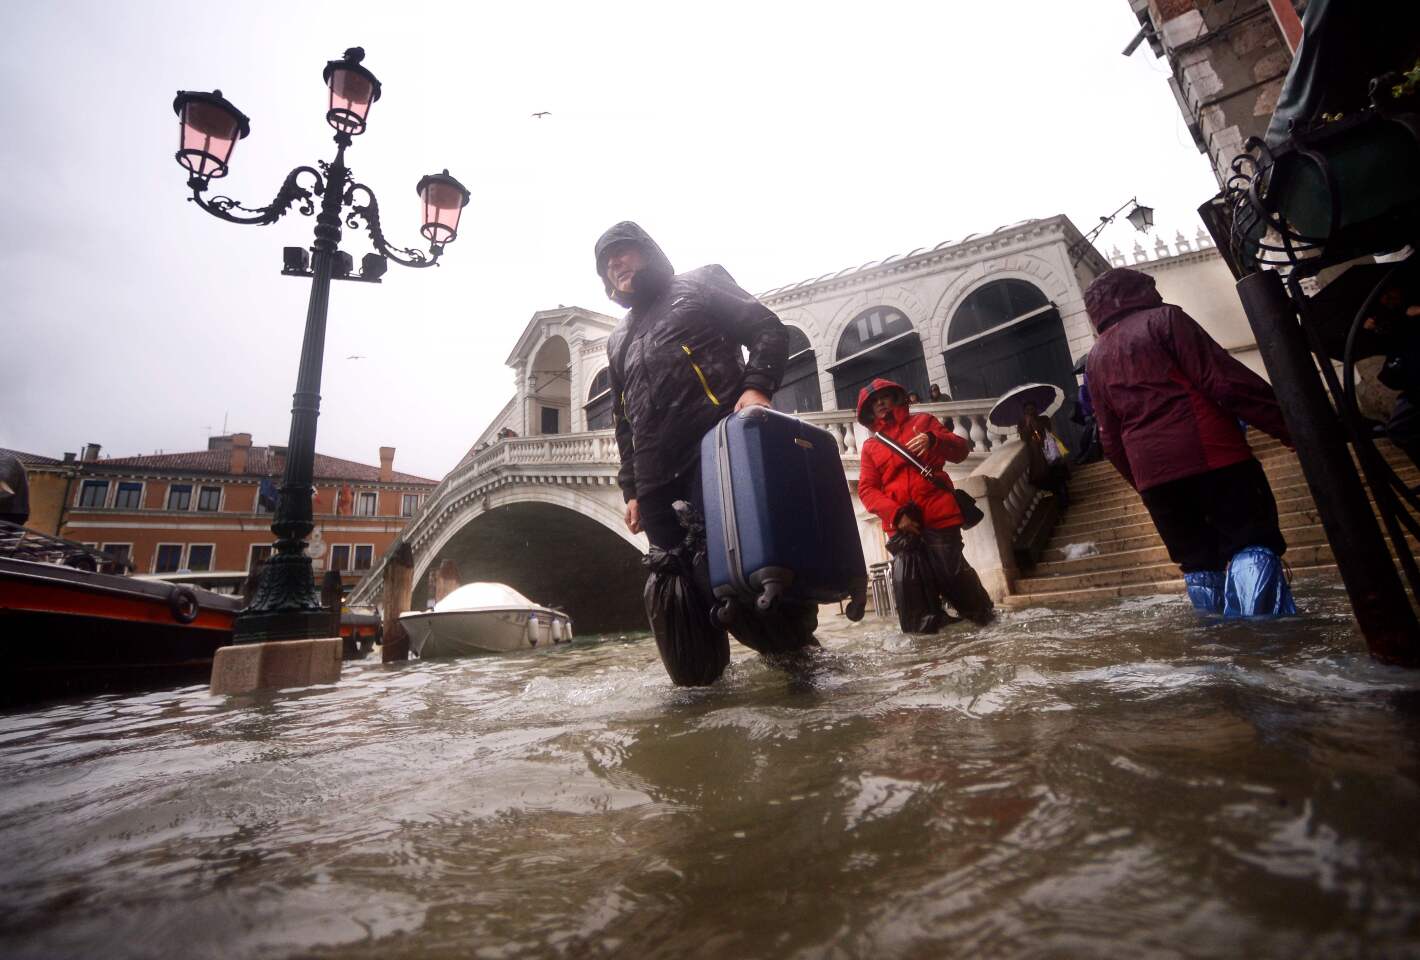 People carry their luggage in a flooded street near Rialto bridge in Venice, two days after the city suffered its highest tide in 50 years.